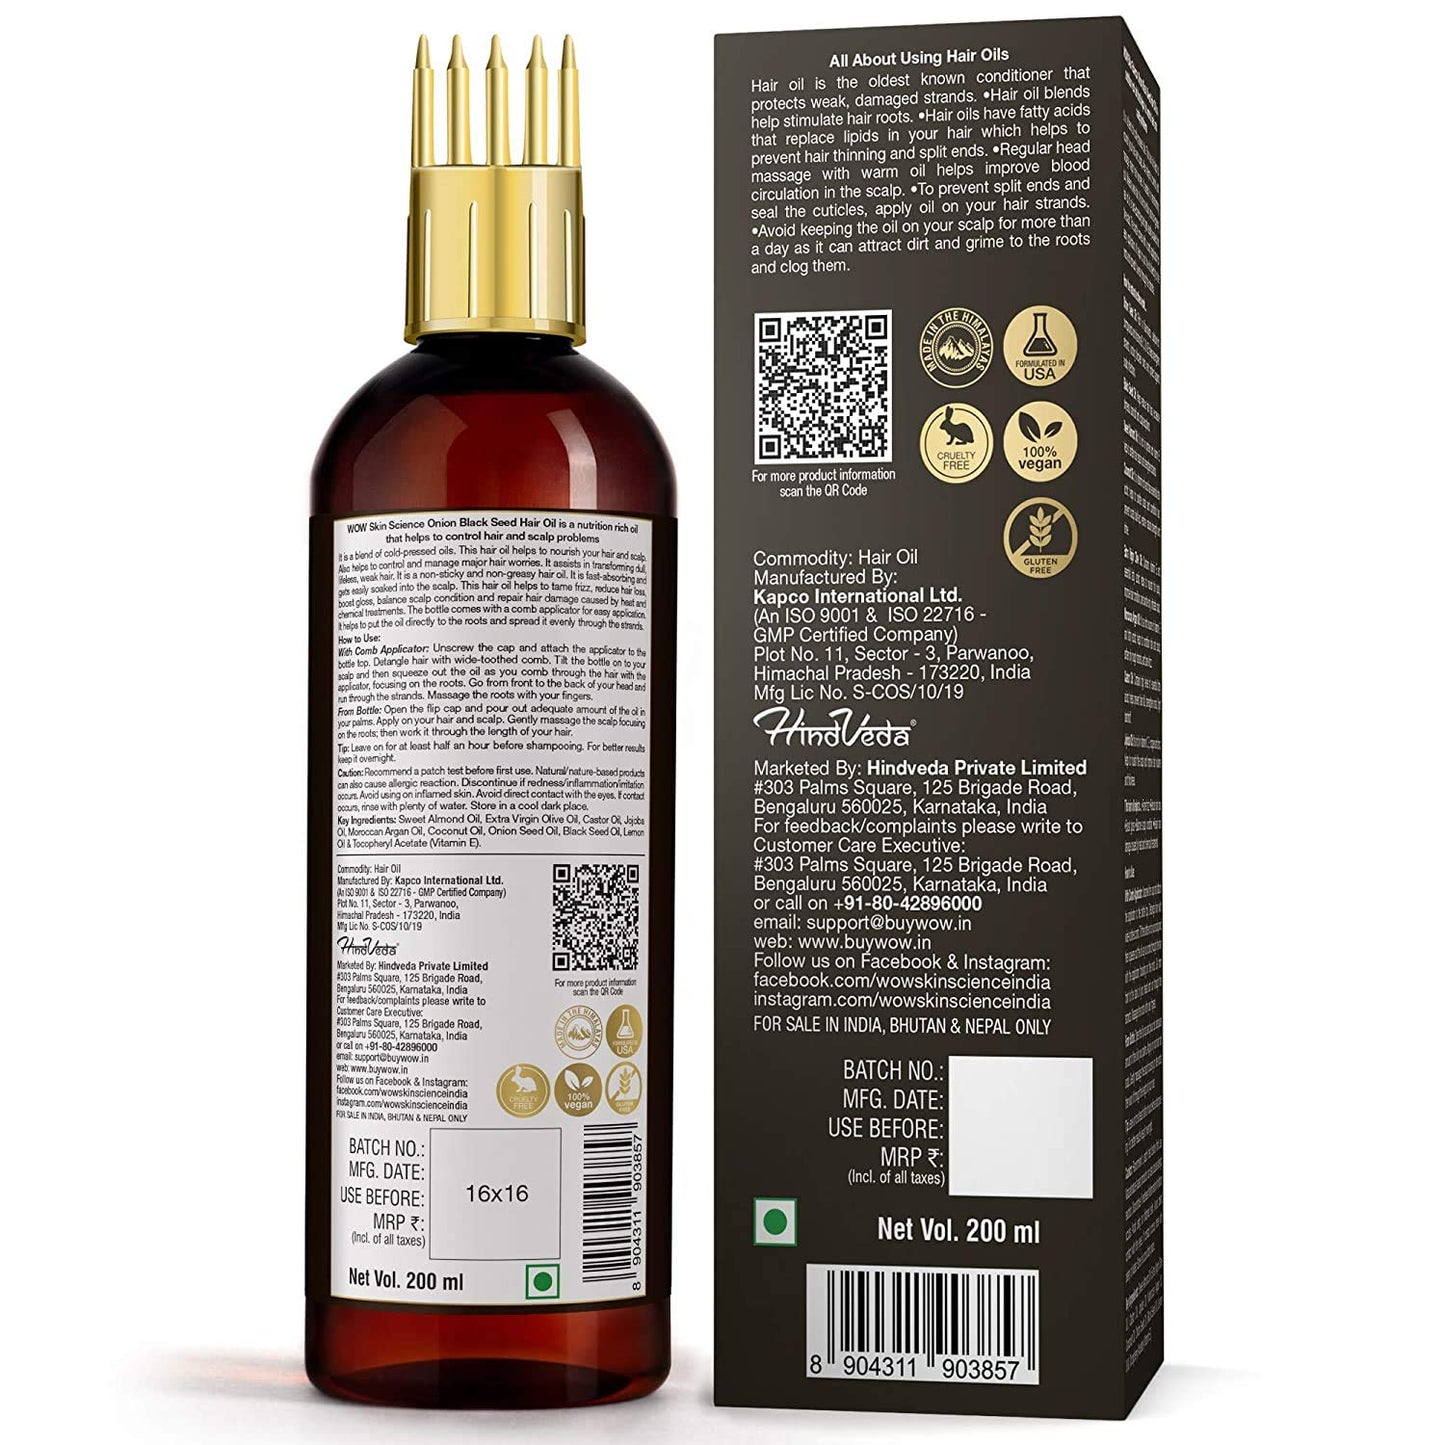 WOW Skin Science Onion Hair Oil for Hair Growth and Hair Fall Control - With Black Seed Oil Extracts - with COMB APPLICATOR - 200 ml